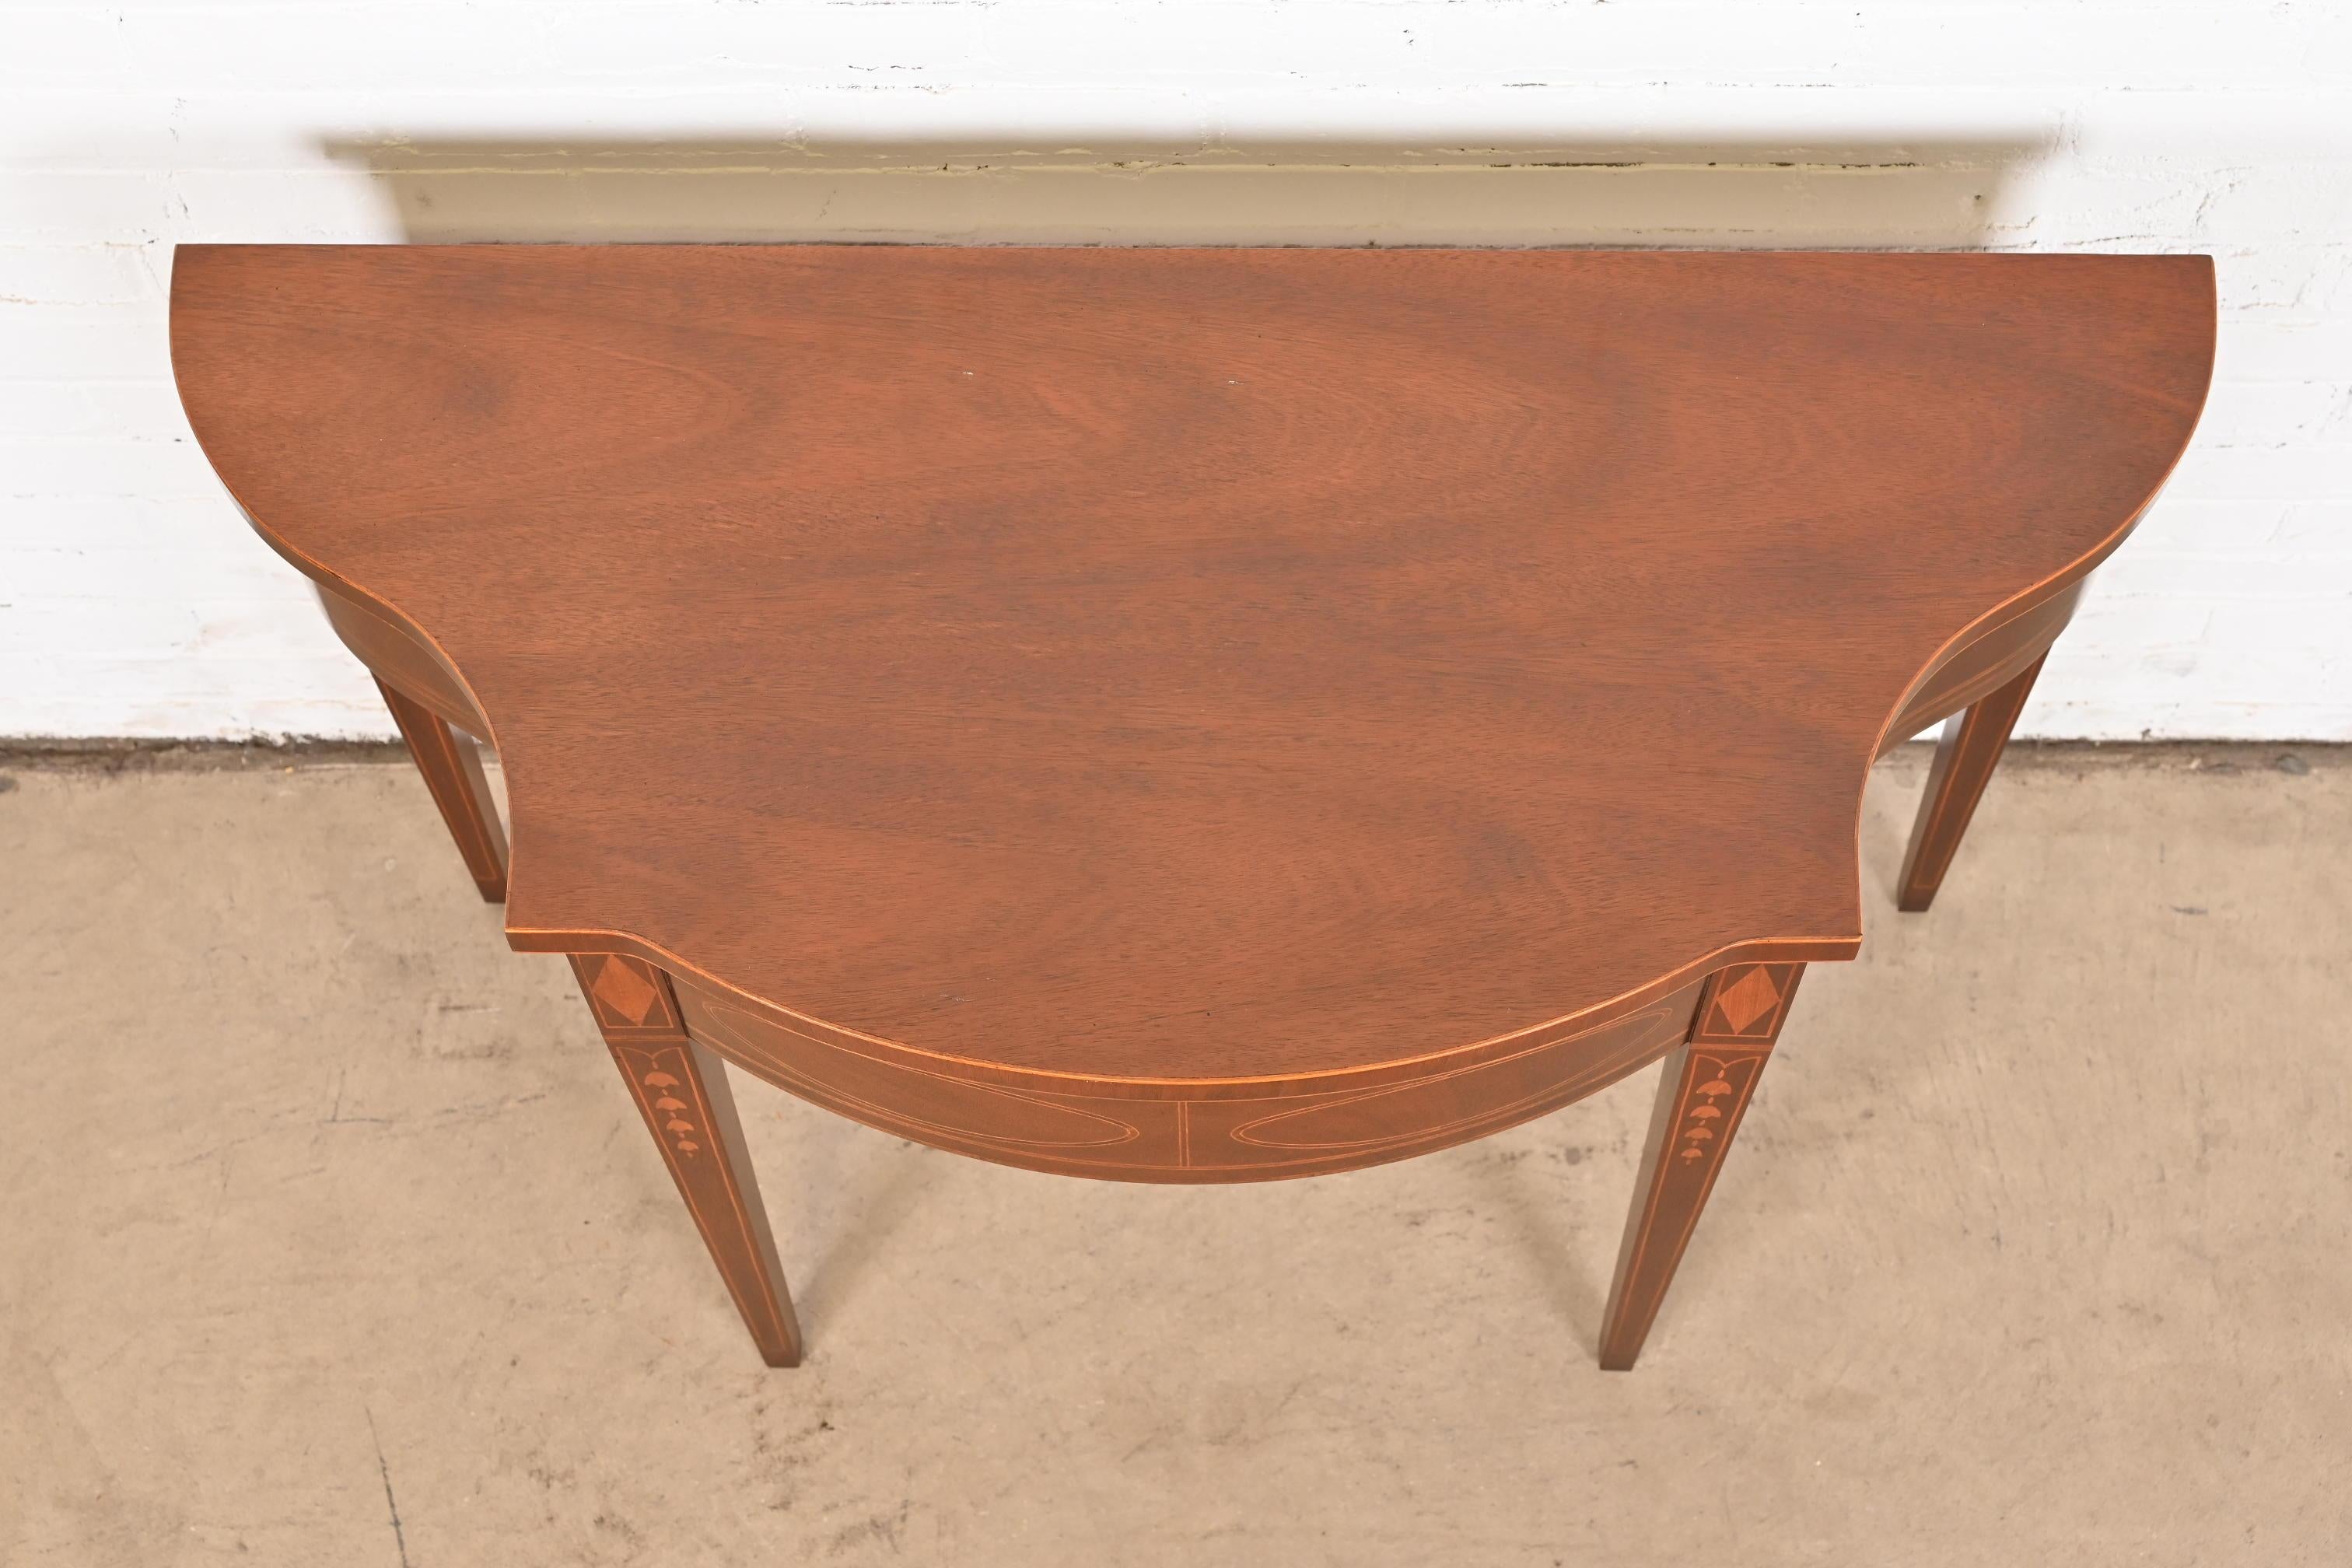 Baker Furniture Historic Charleston Federal Inlaid Mahogany Console Table For Sale 4